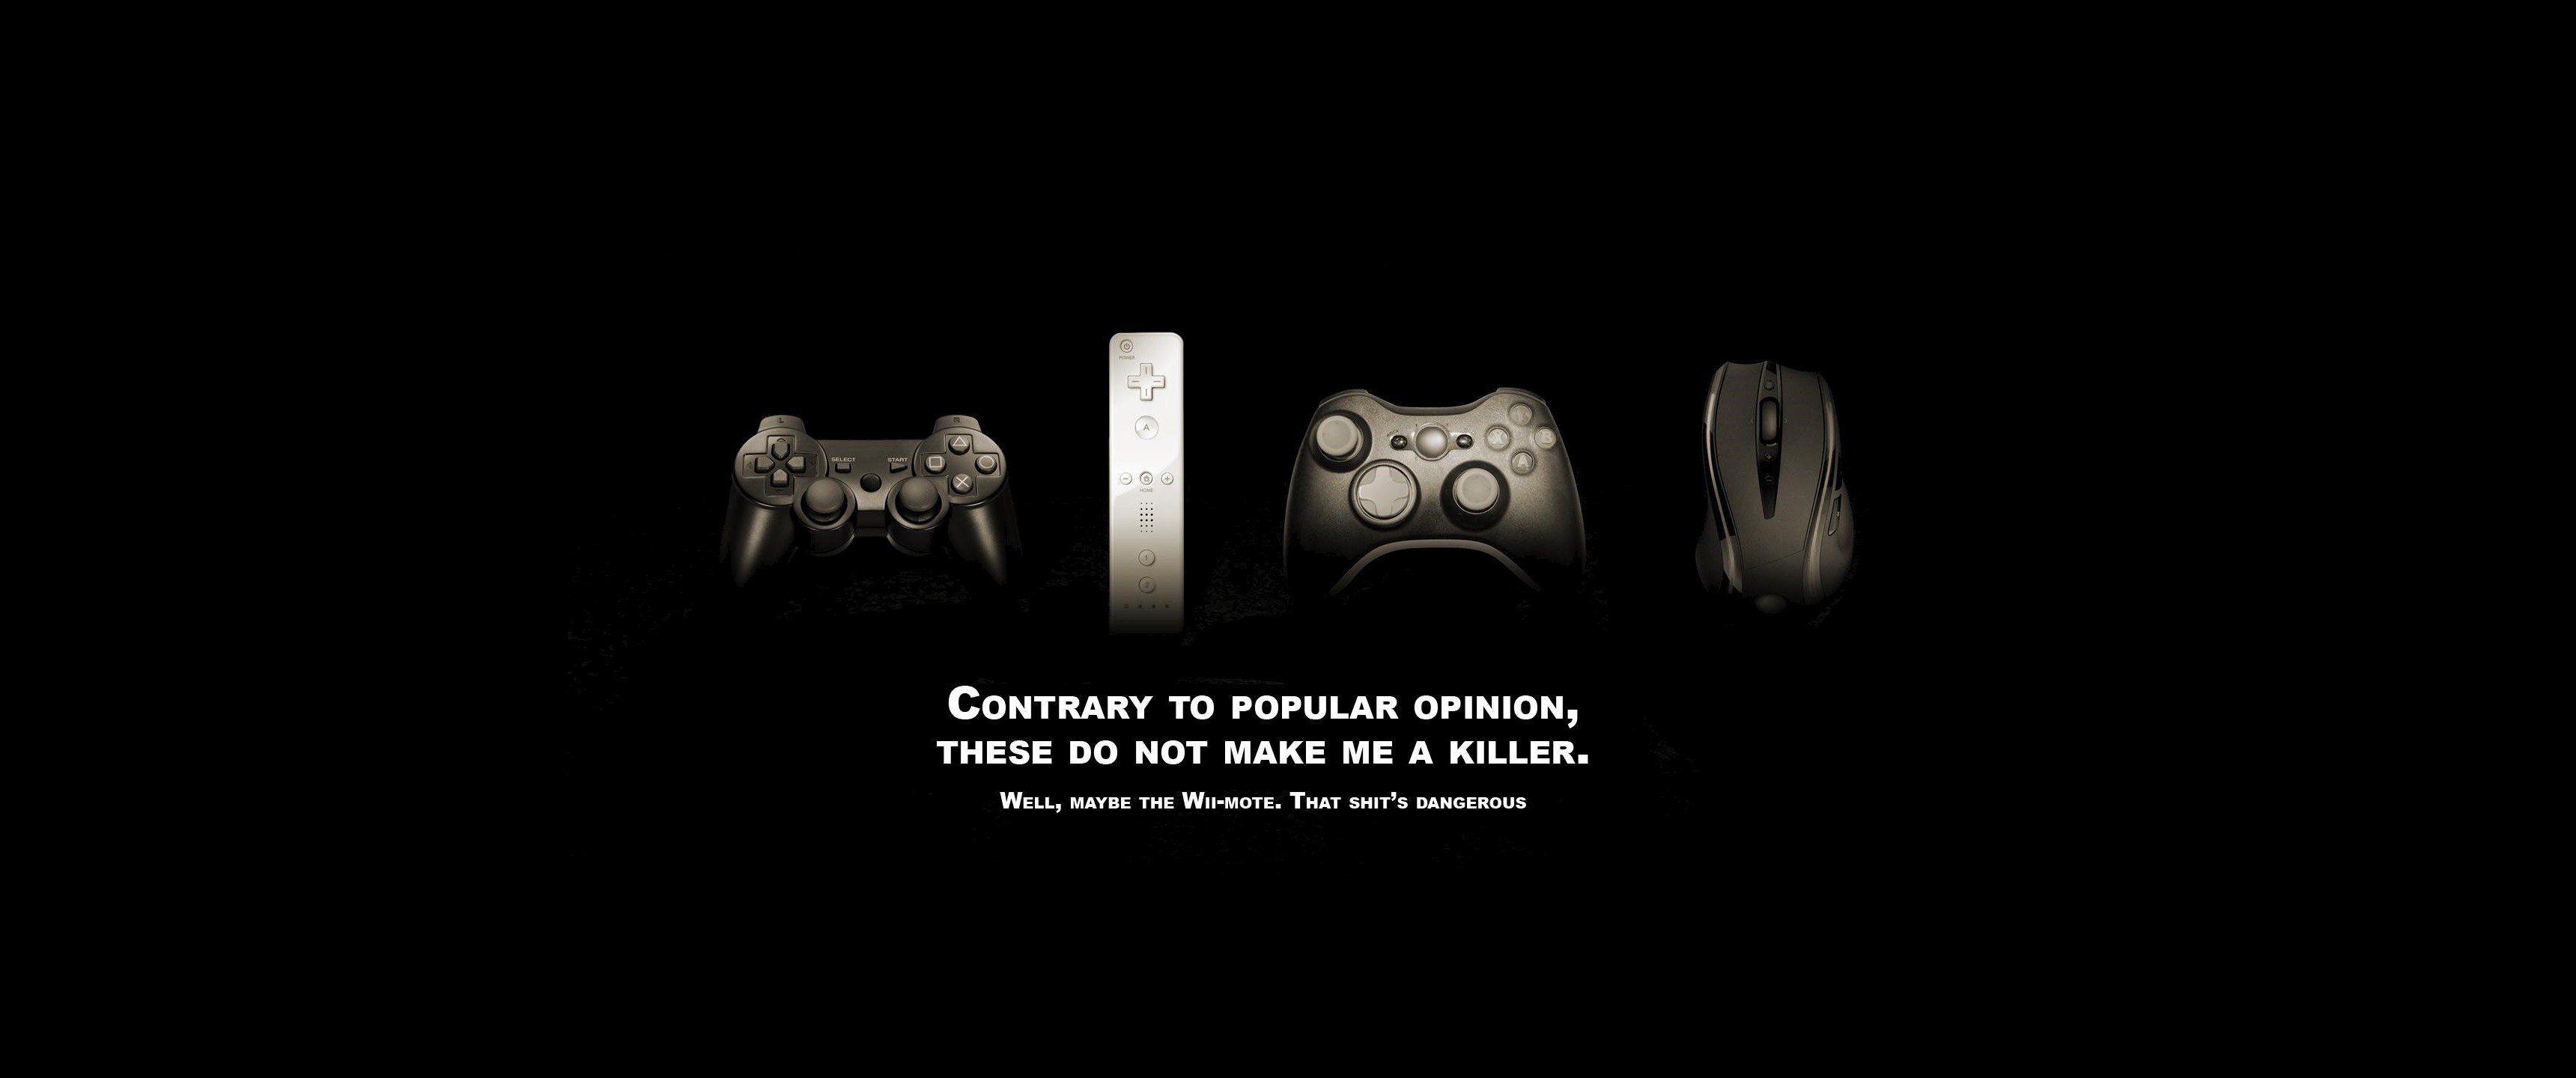 video games, Controllers, Quote, Typography, Black background, Computer mouse, X Box, Wii, PlayStation, Humor Wallpaper